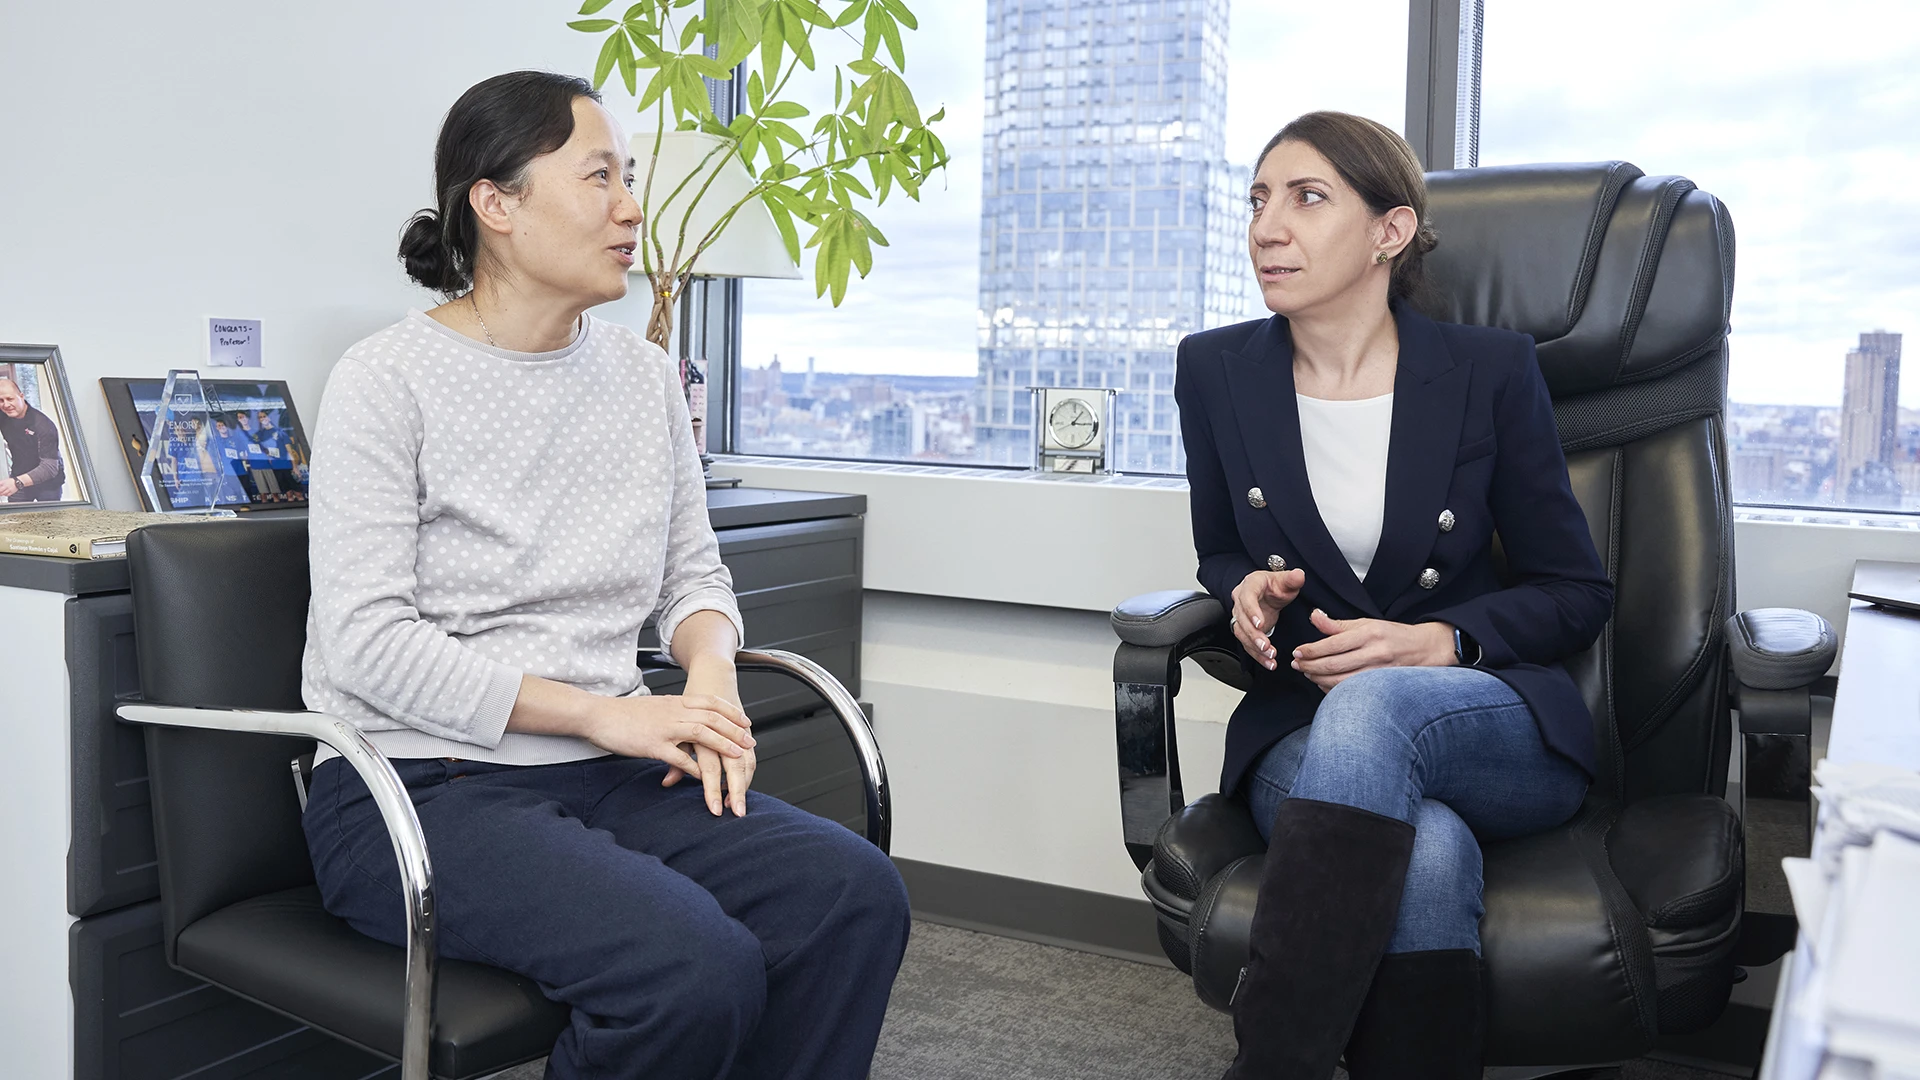 Drs. Zou (left) and Hambardzumyan (right) are collaborating with other specialists at Mount Sinai, from the departments of Neuroscience, and Neurosurgery, to devise actionable clinical strategies. They are optimistic they will find novel pathways in altering the trajectory of glioblastoma, which has historically poor survival rates.